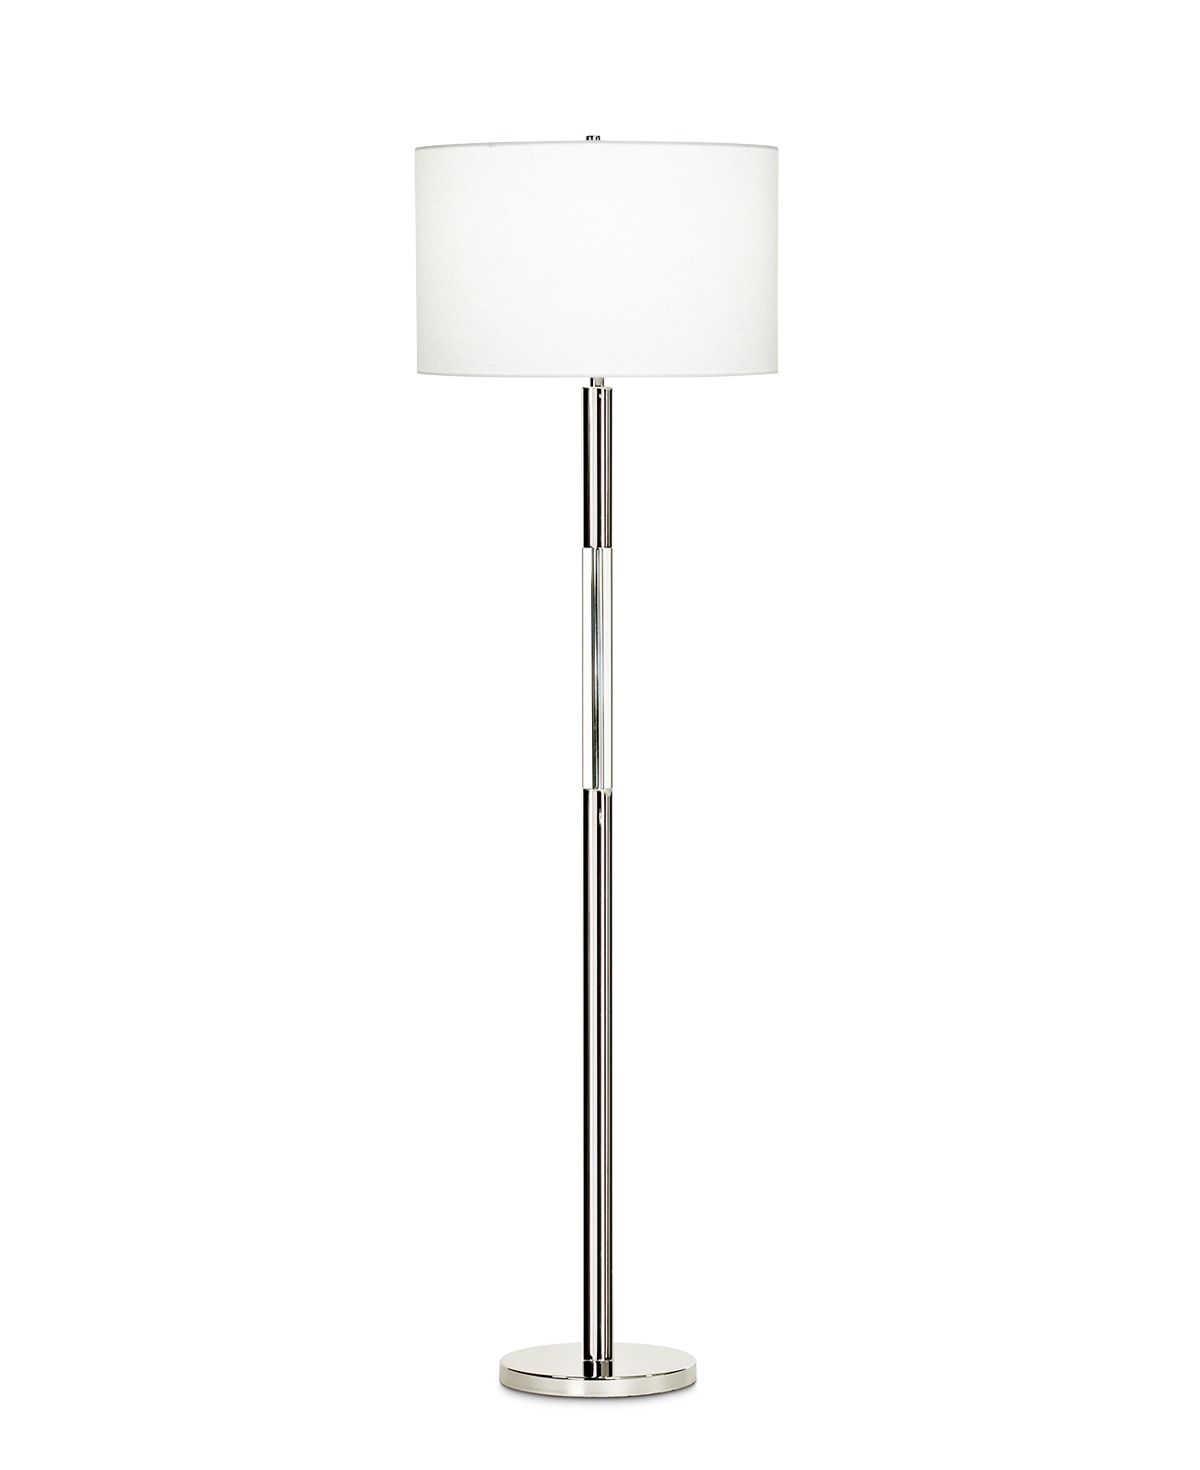 FlowDecor Poppy Floor Lamp in metal with polished nickel finish and crystal and off-white linen drum shade (# 3719)